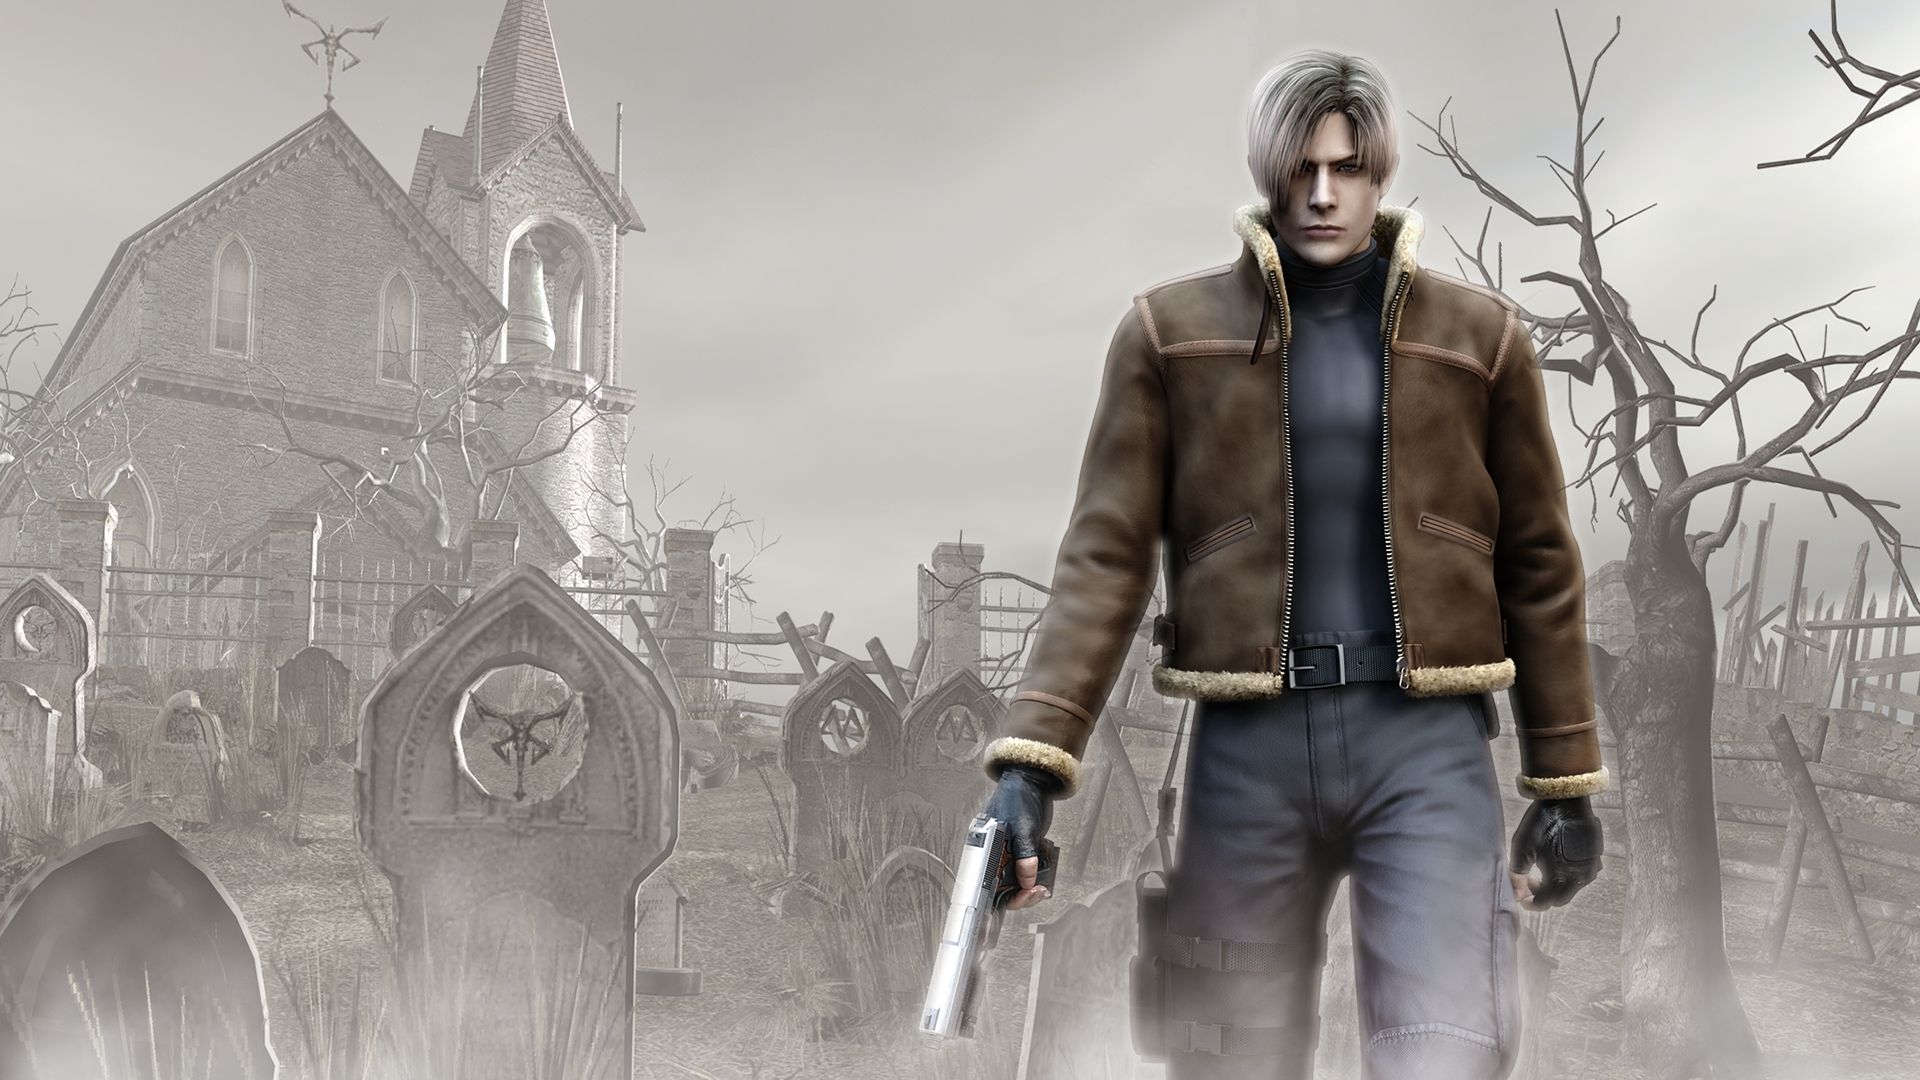 The main character from Resident Evil 4 standing in front of a graveyard behind a church in the mist. He is holding a silver pistol.